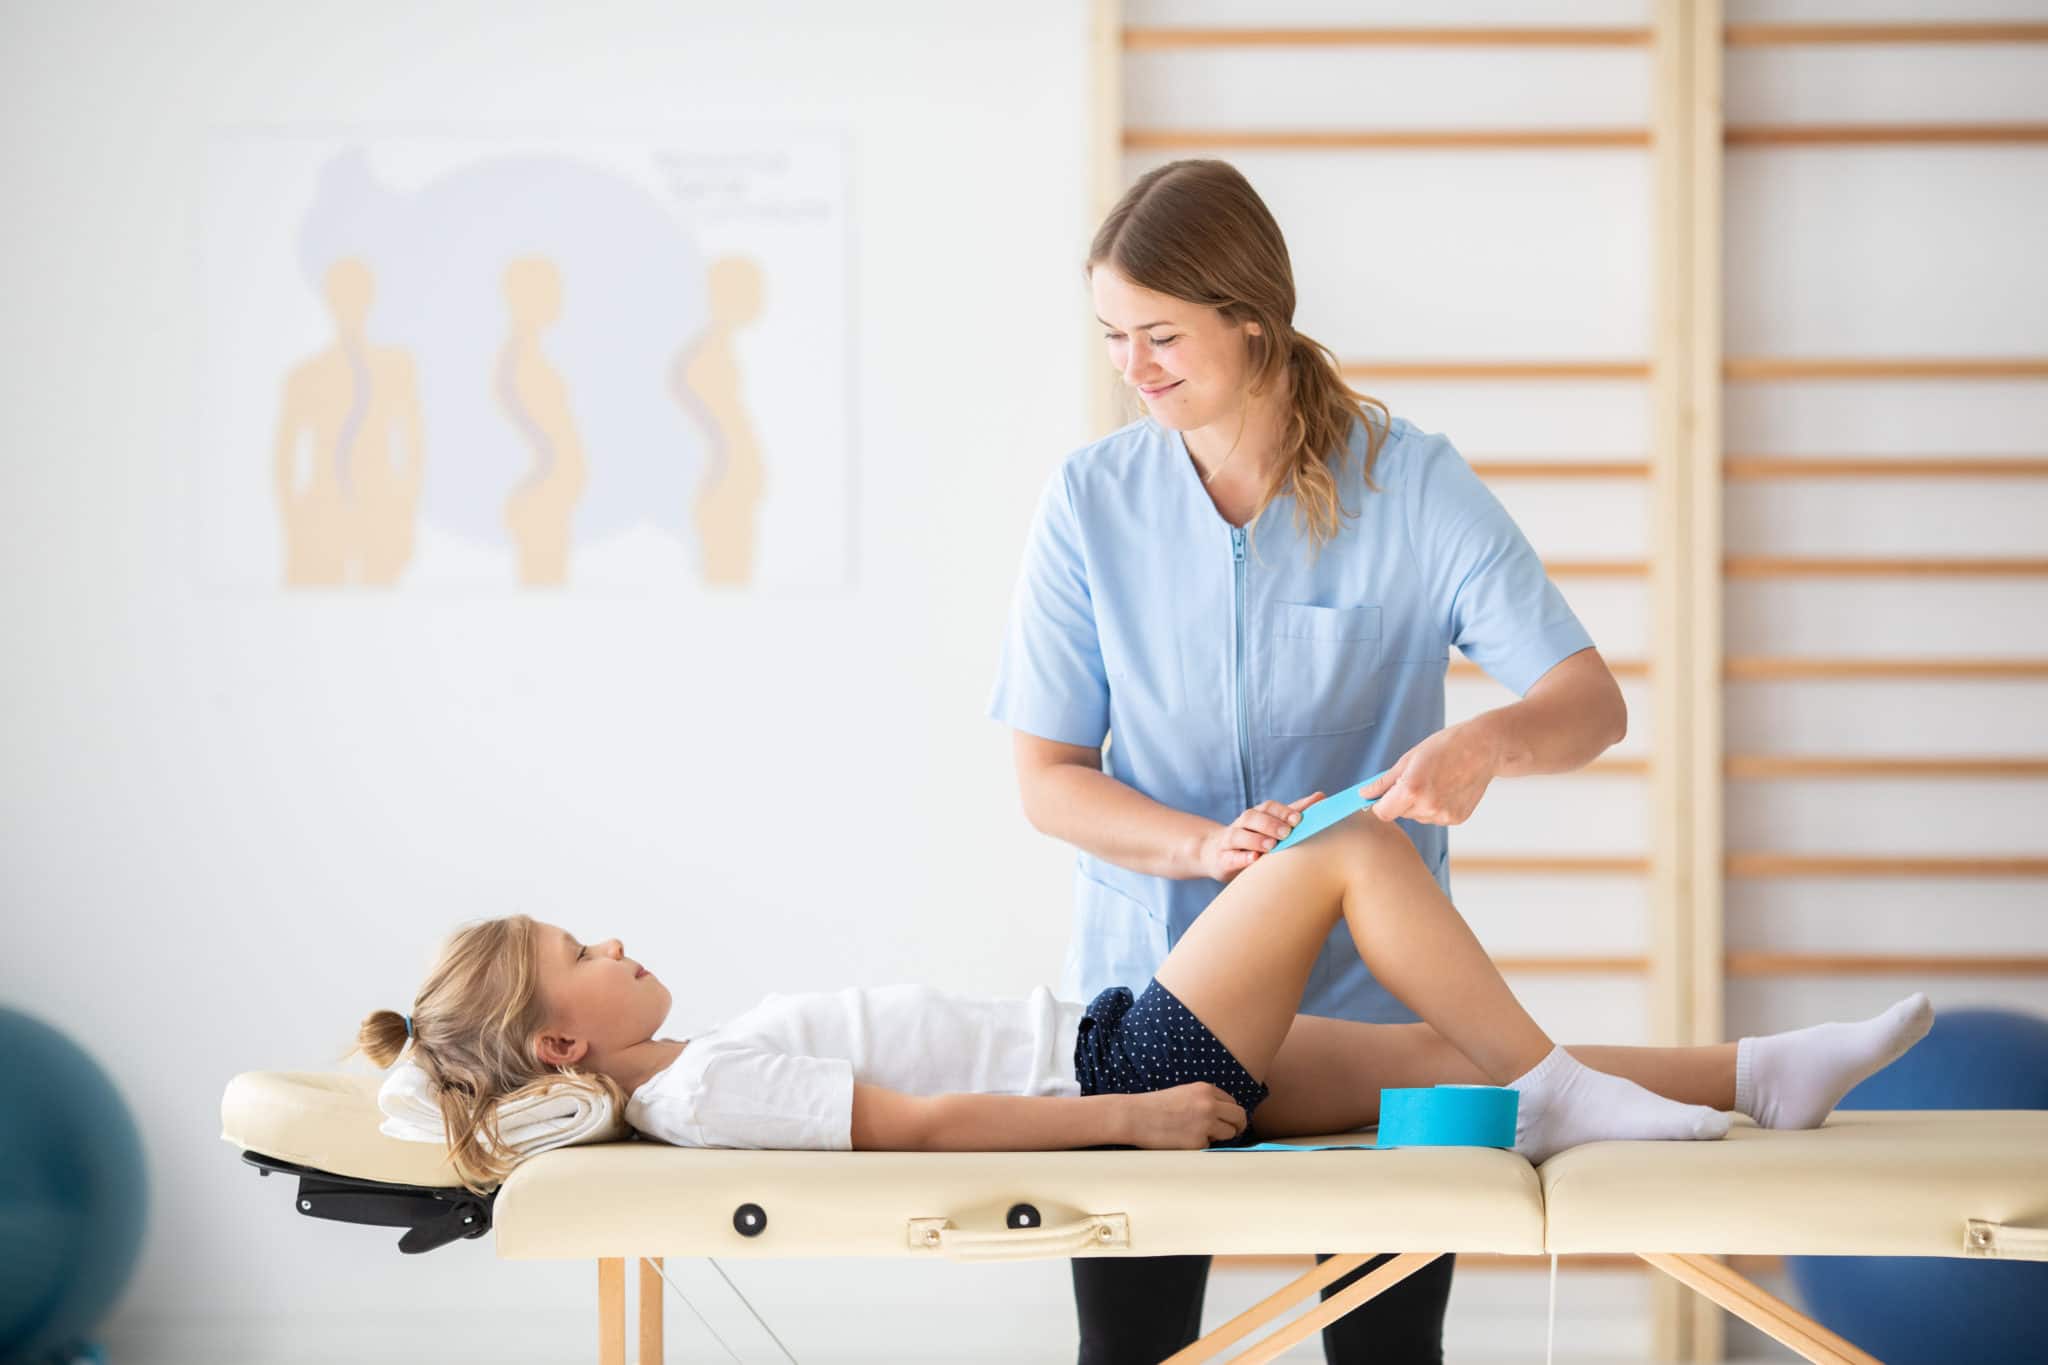 Physiotherapist treating patient in relation to Medicare's 8-minute rule